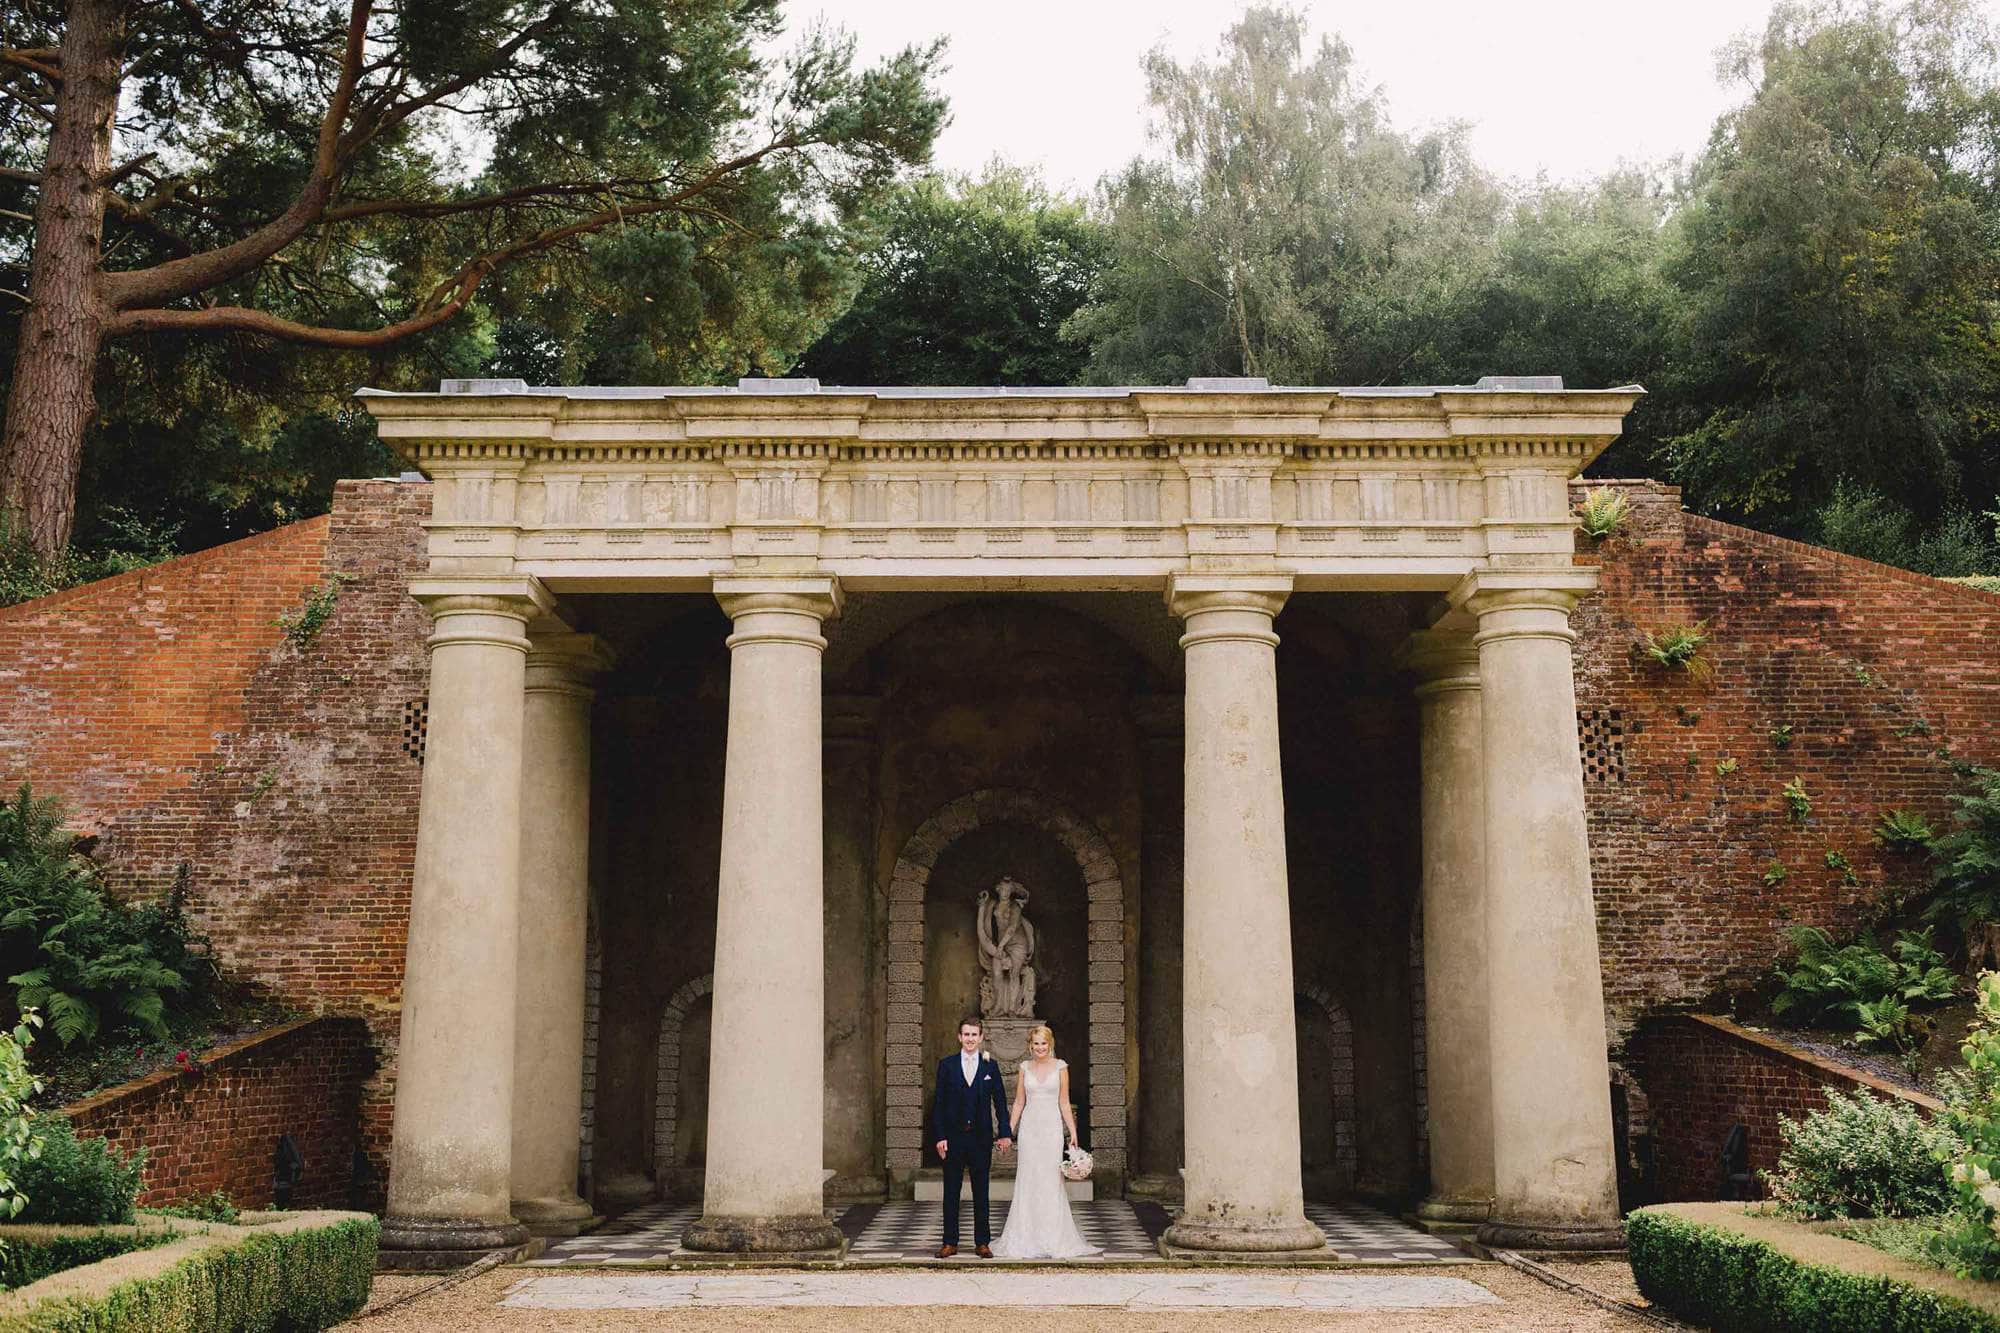 Wotton House temple with the bride and groom.